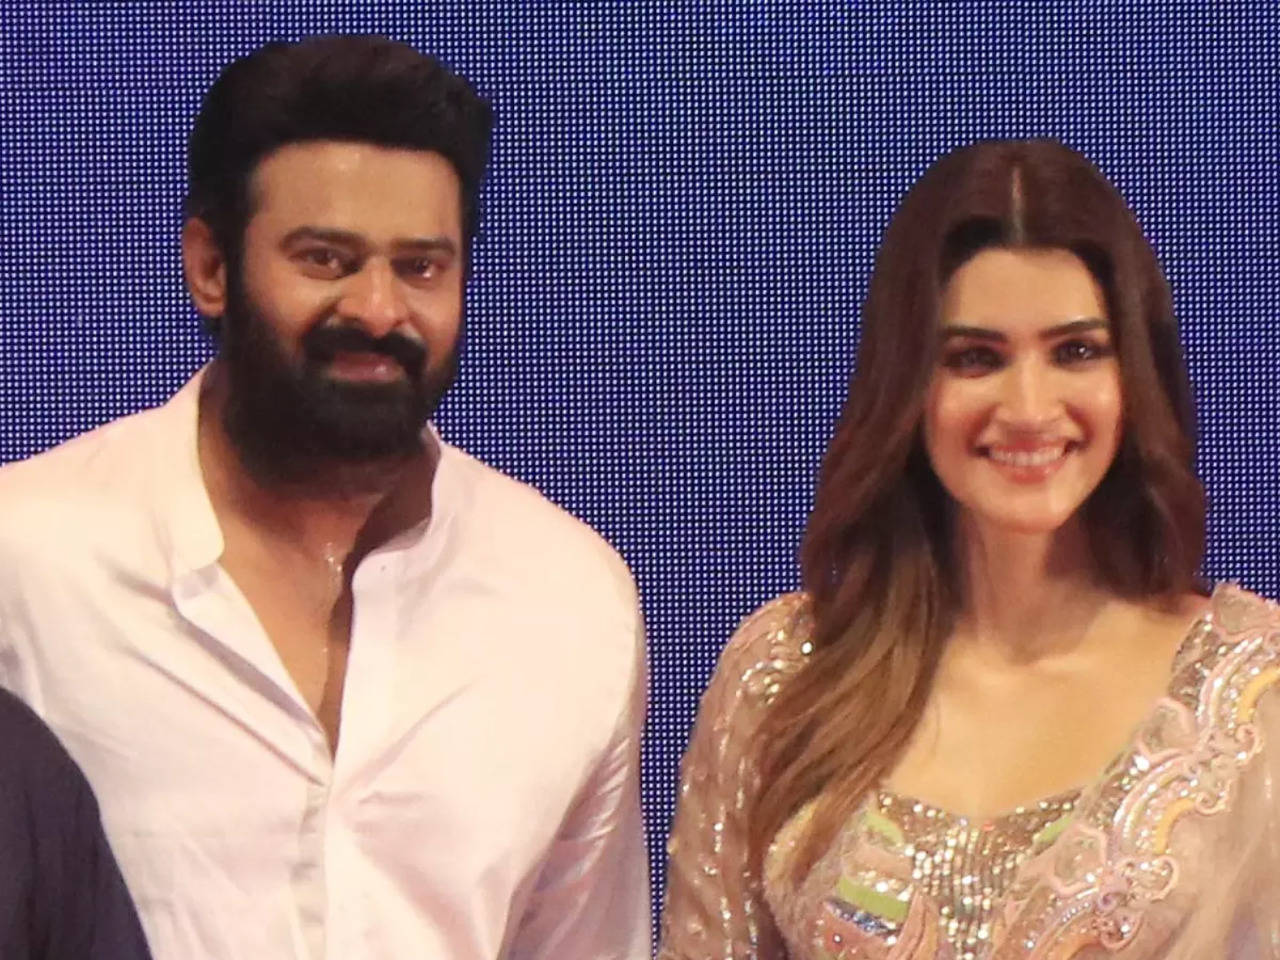 Amid dating rumours, Kriti Sanon says she would marry Prabhas ...